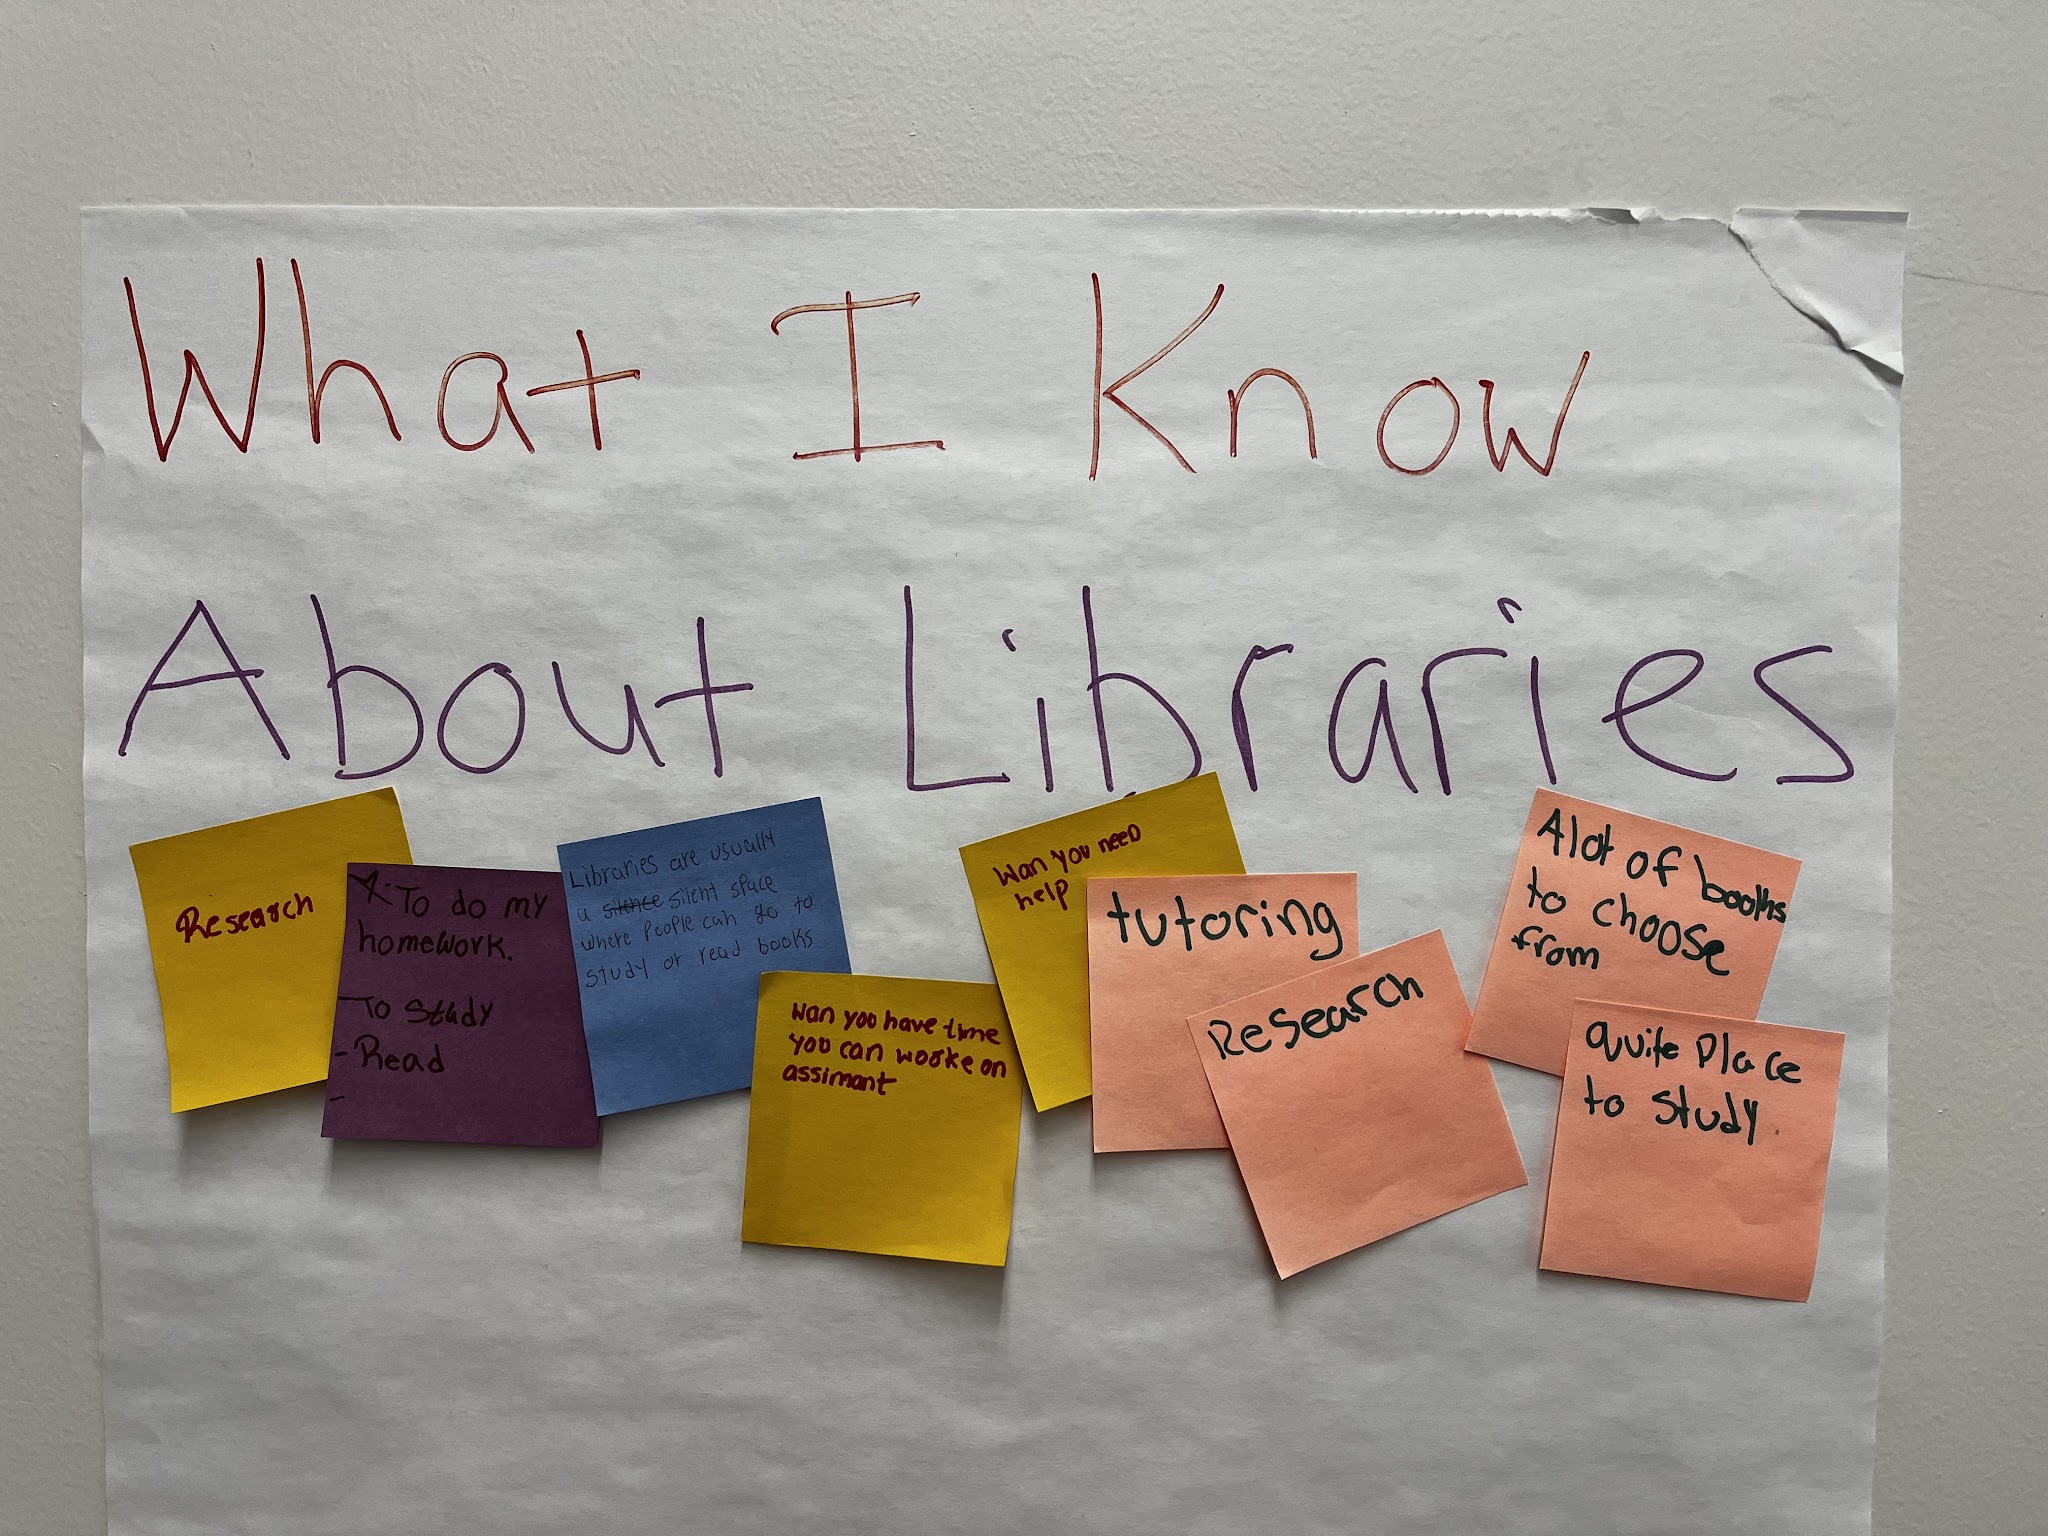 What I know about libraries with sticky note answers